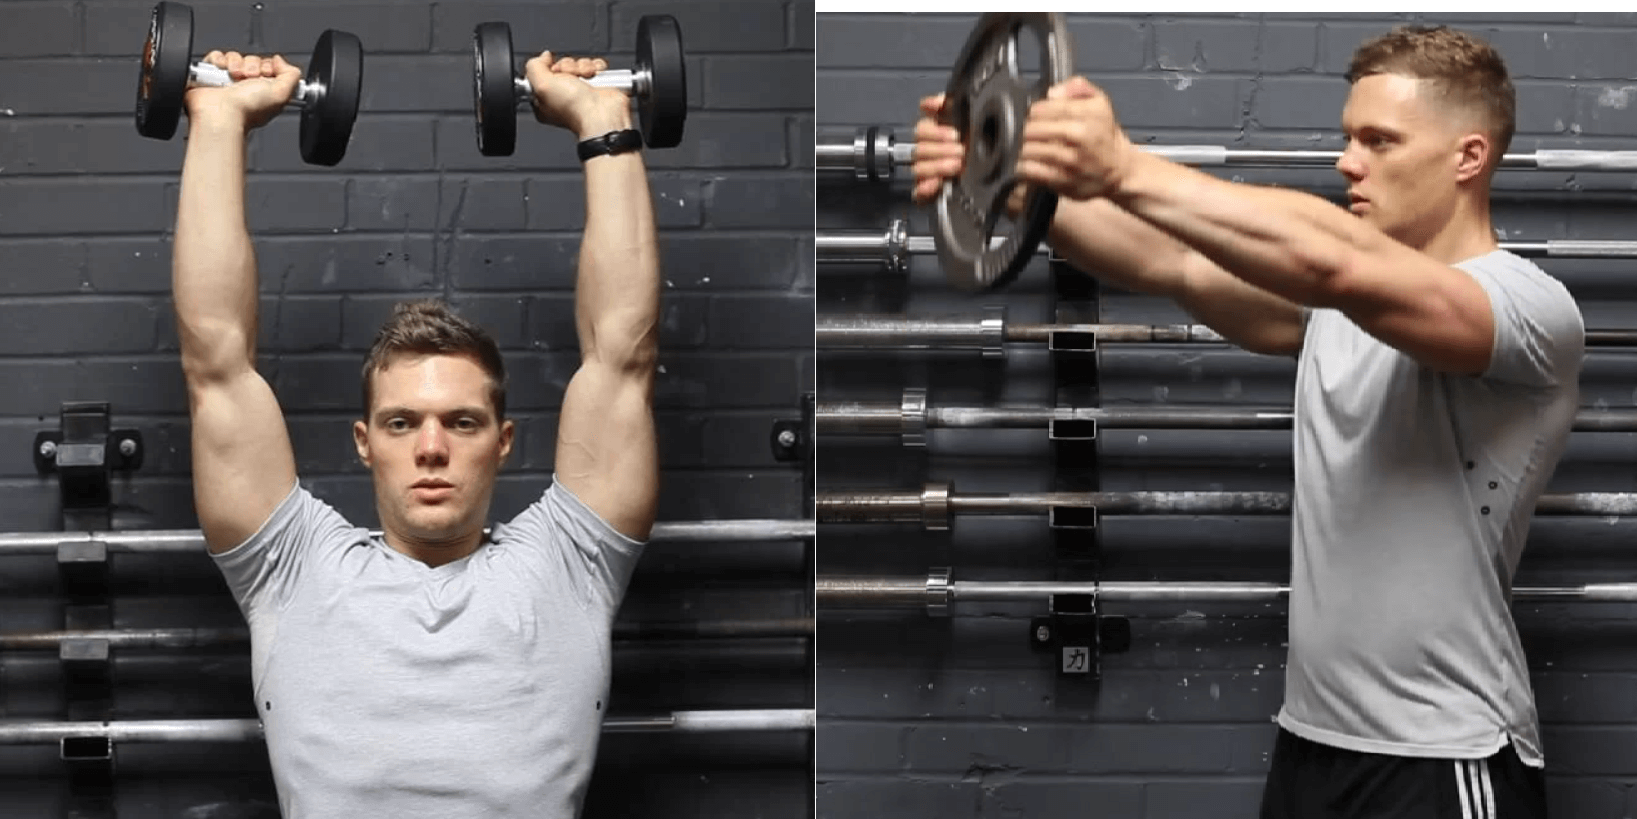 Here is an ultimate comparison between front plate vs dumbbell front raises